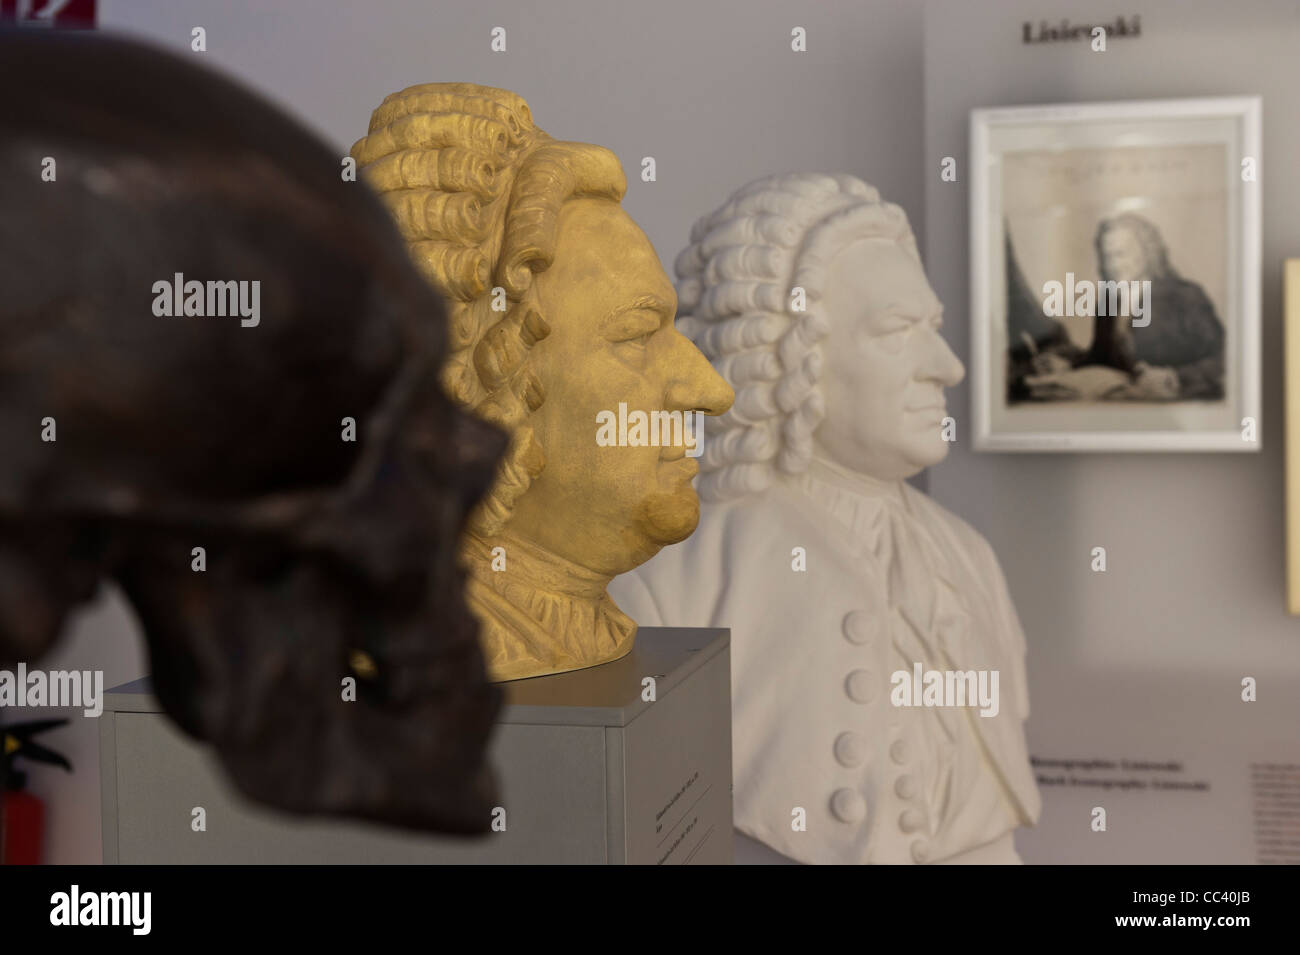 Skull cast and Bach bust by Carl Ludwig Seffner at Bach House, Bachhaus, Eisenach, Thuringia, Germany, Europe. Stock Photo